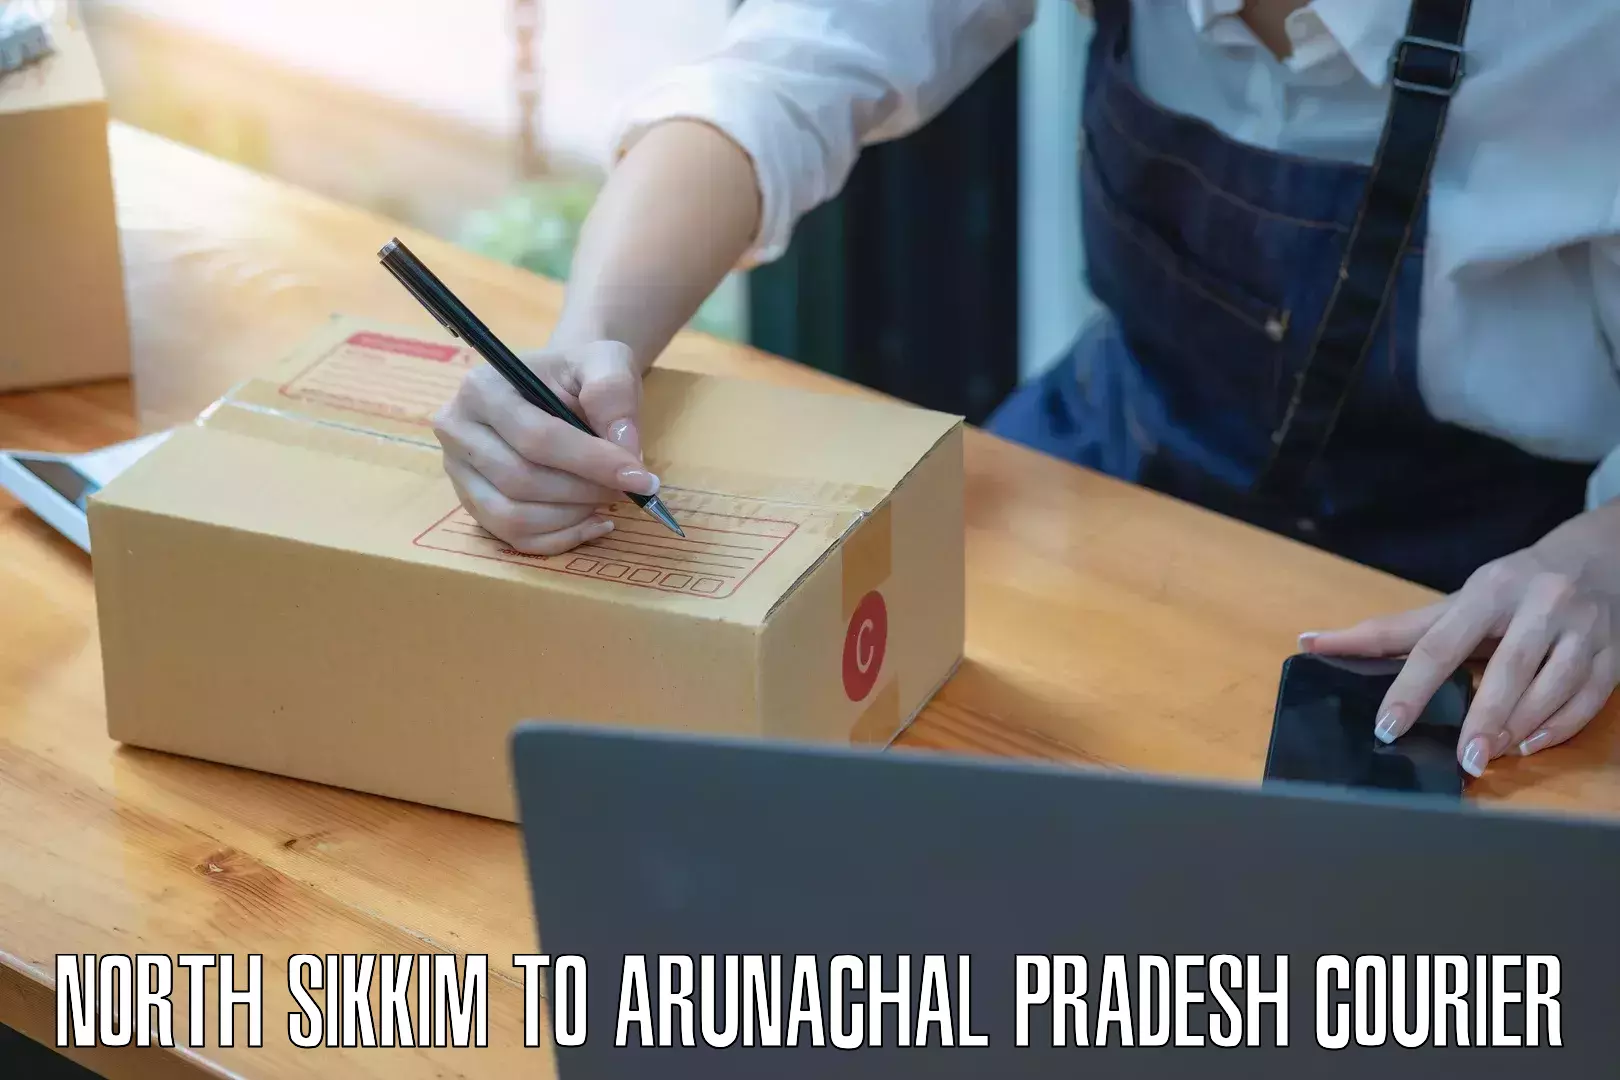 Efficient parcel service in North Sikkim to Likabali